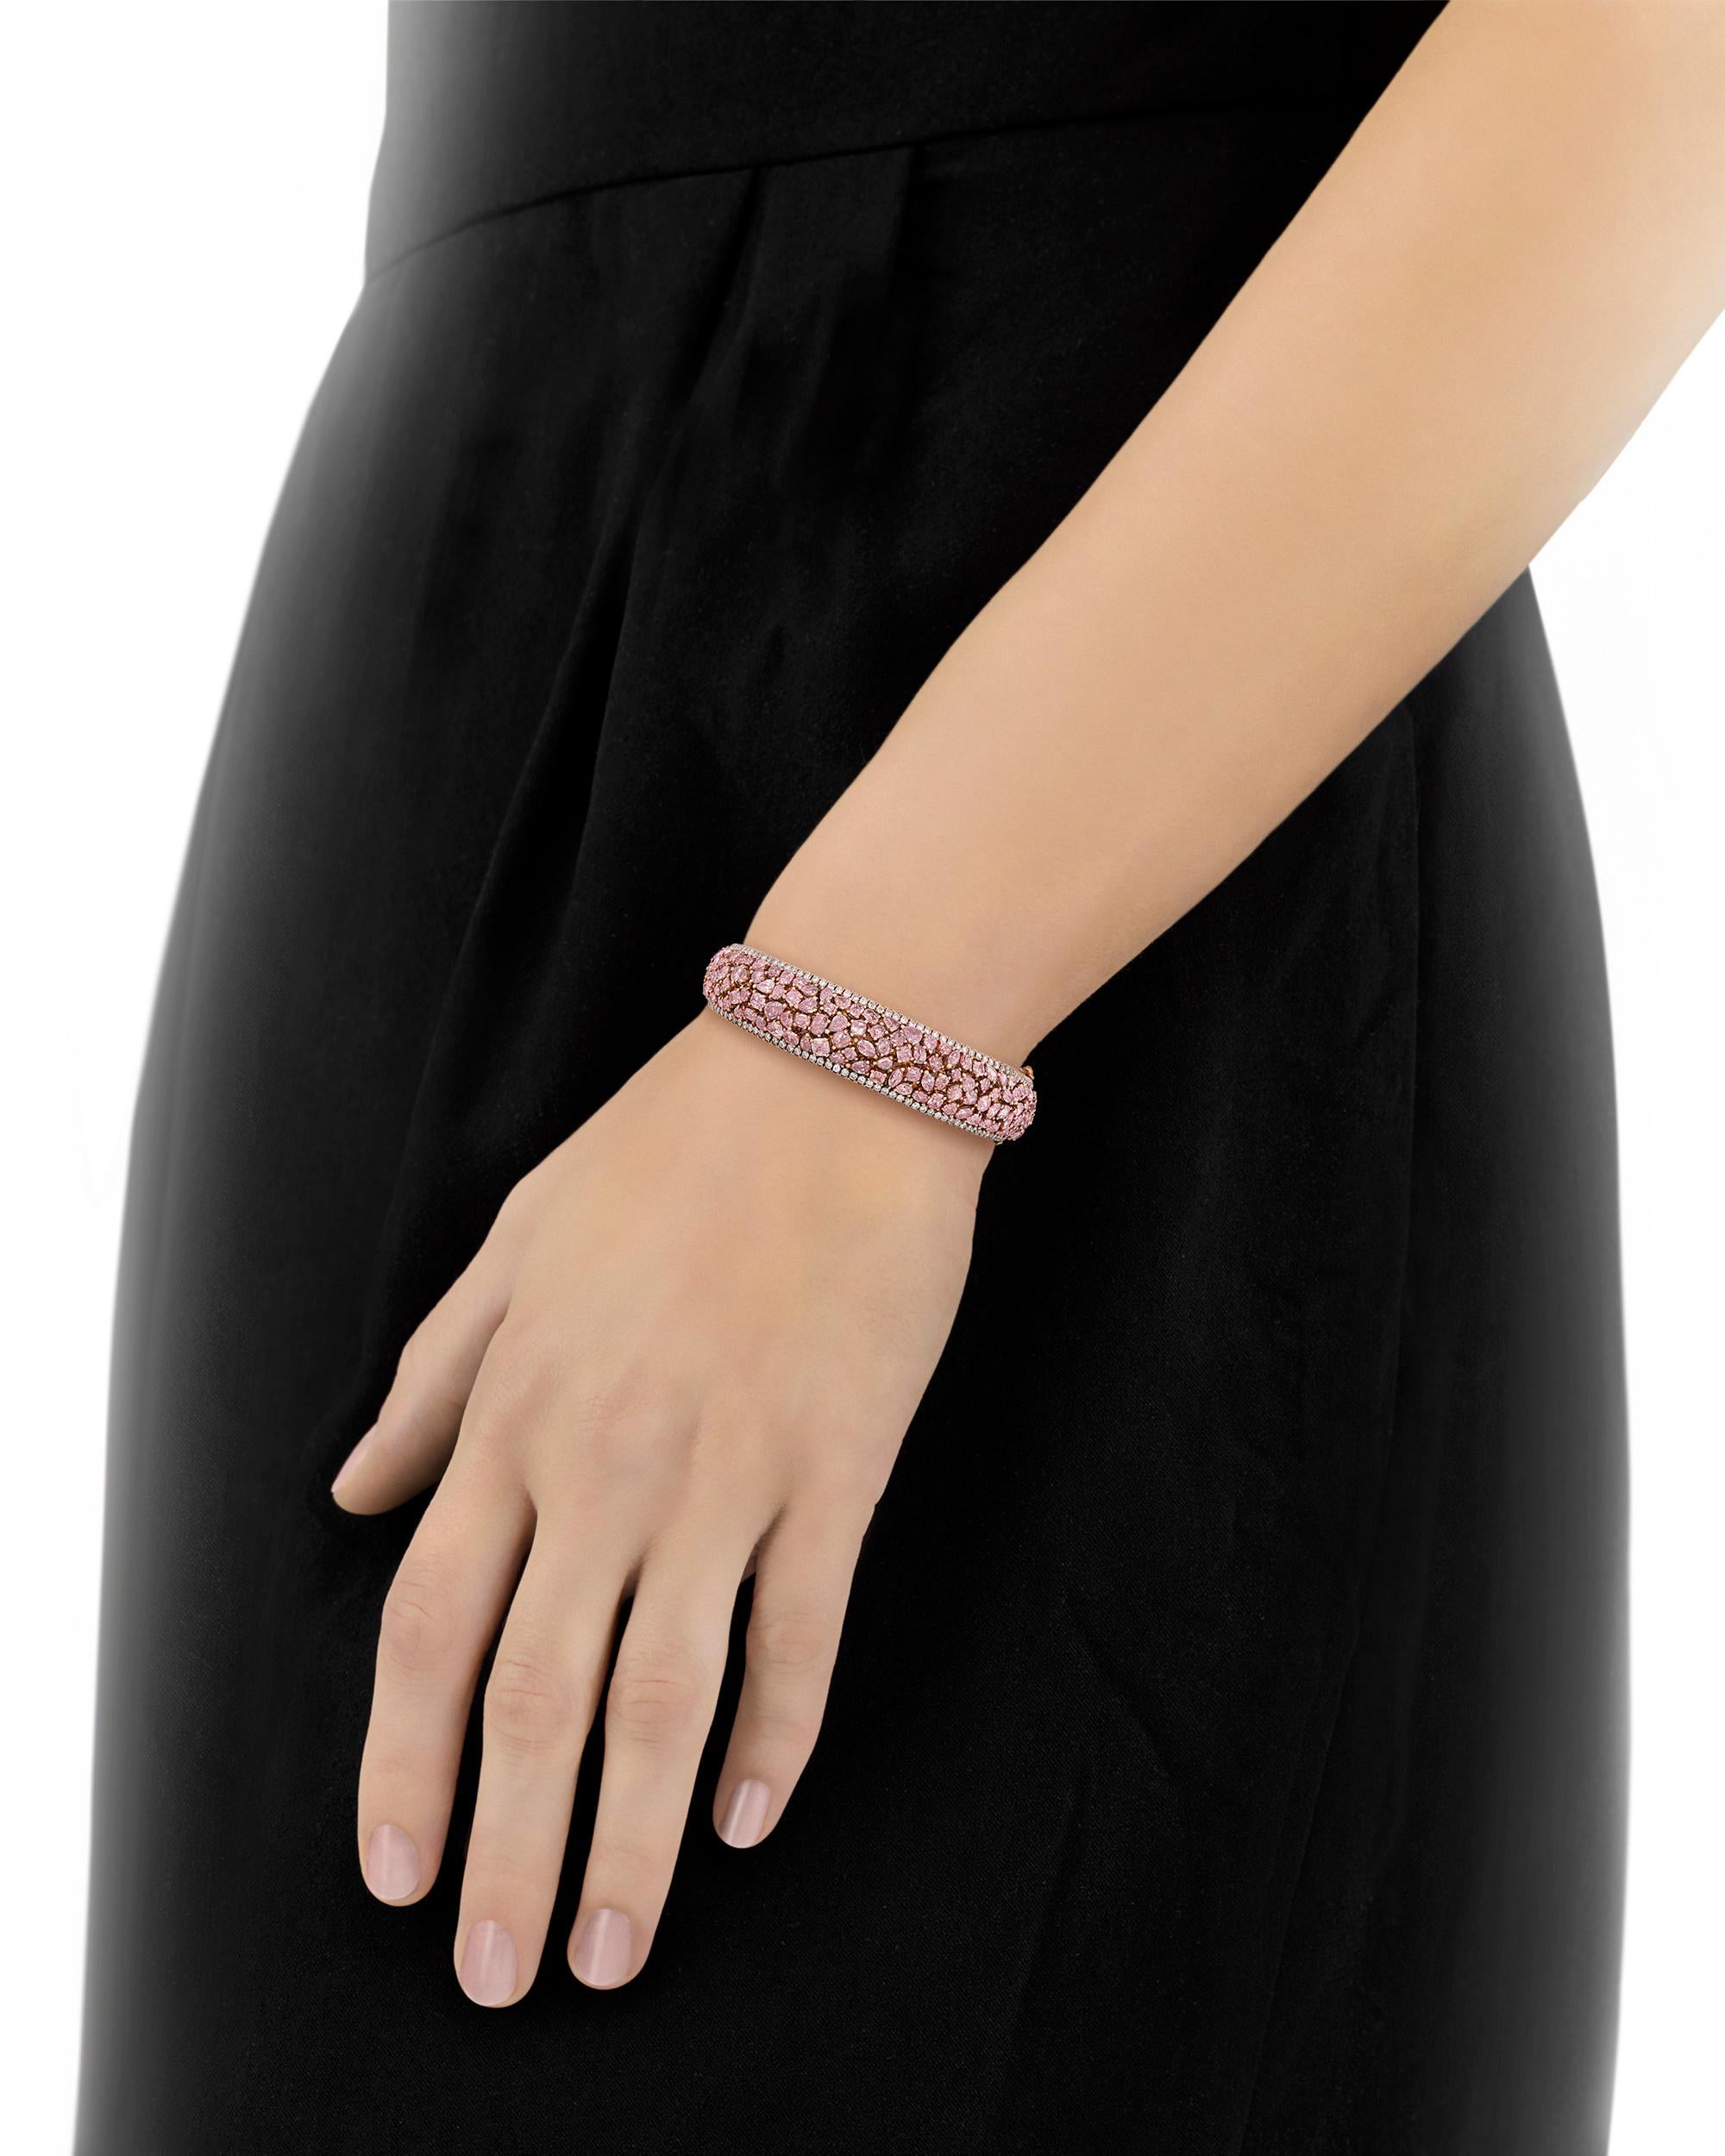 An array of exceptionally rare fancy pink diamonds are set in this exquisite cuff bracelet. Totaling 10.27 total carats, the stones are cut in a range of shapes from marquise and round to pear and cushion, and each is perfectly placed into the